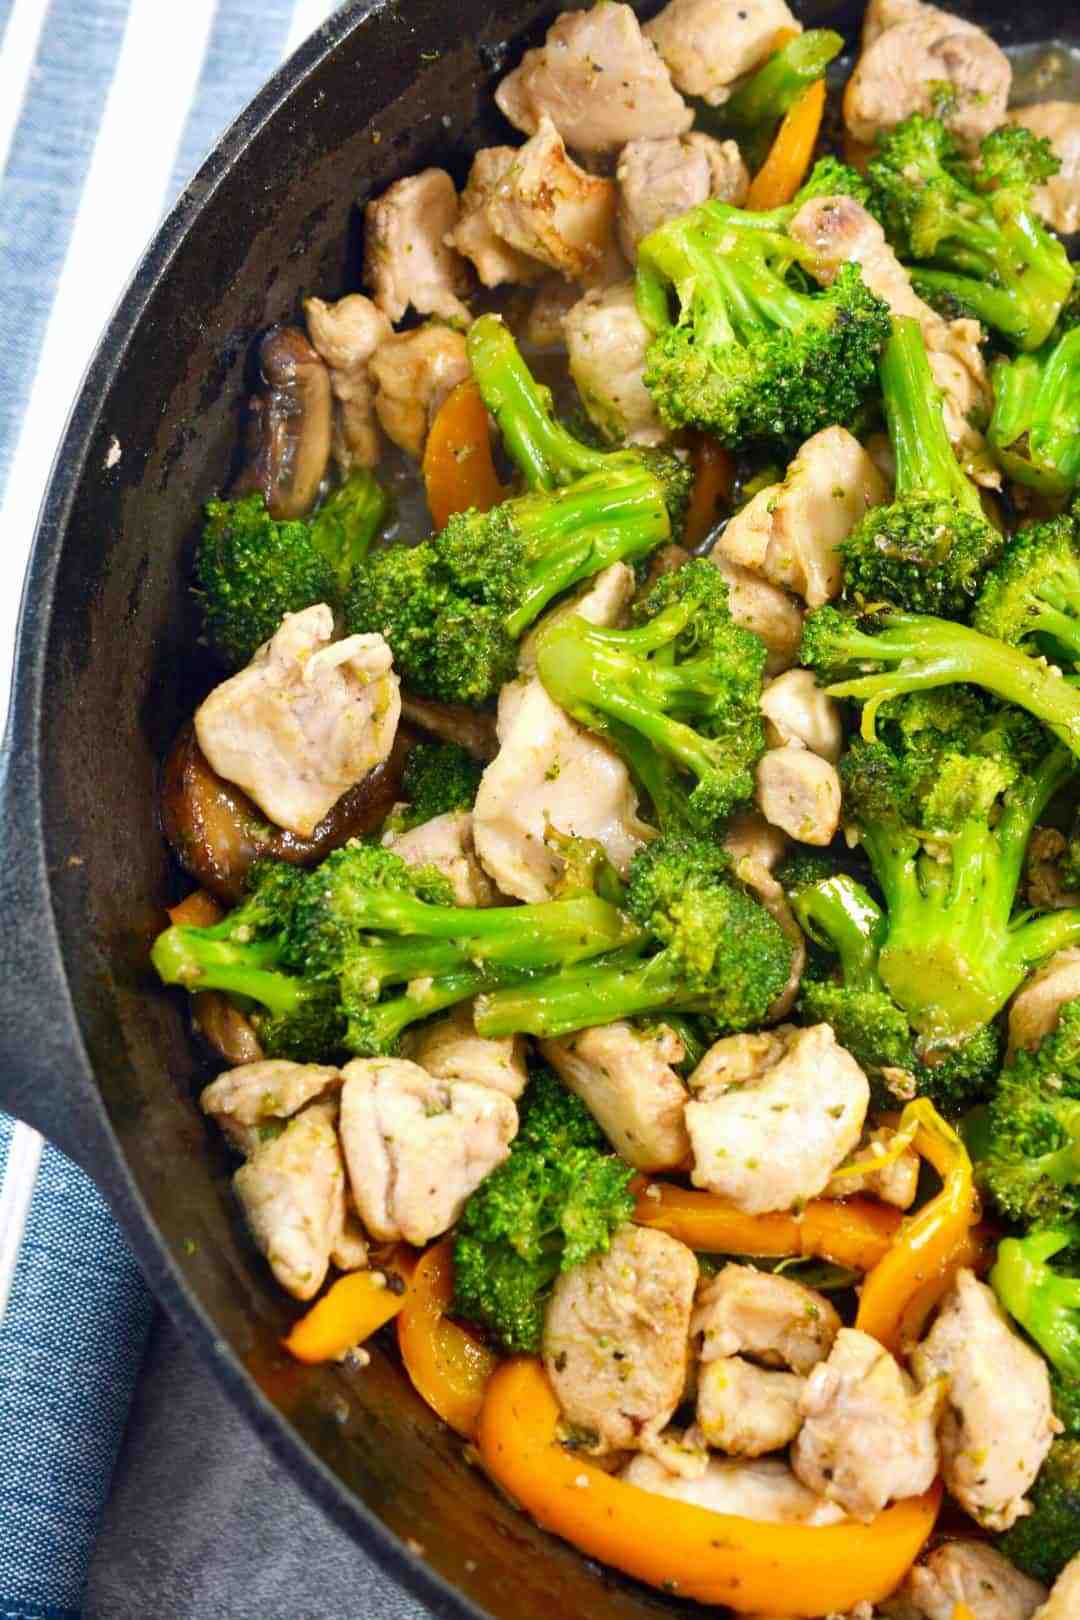 pan with chicken broccoli stir fry